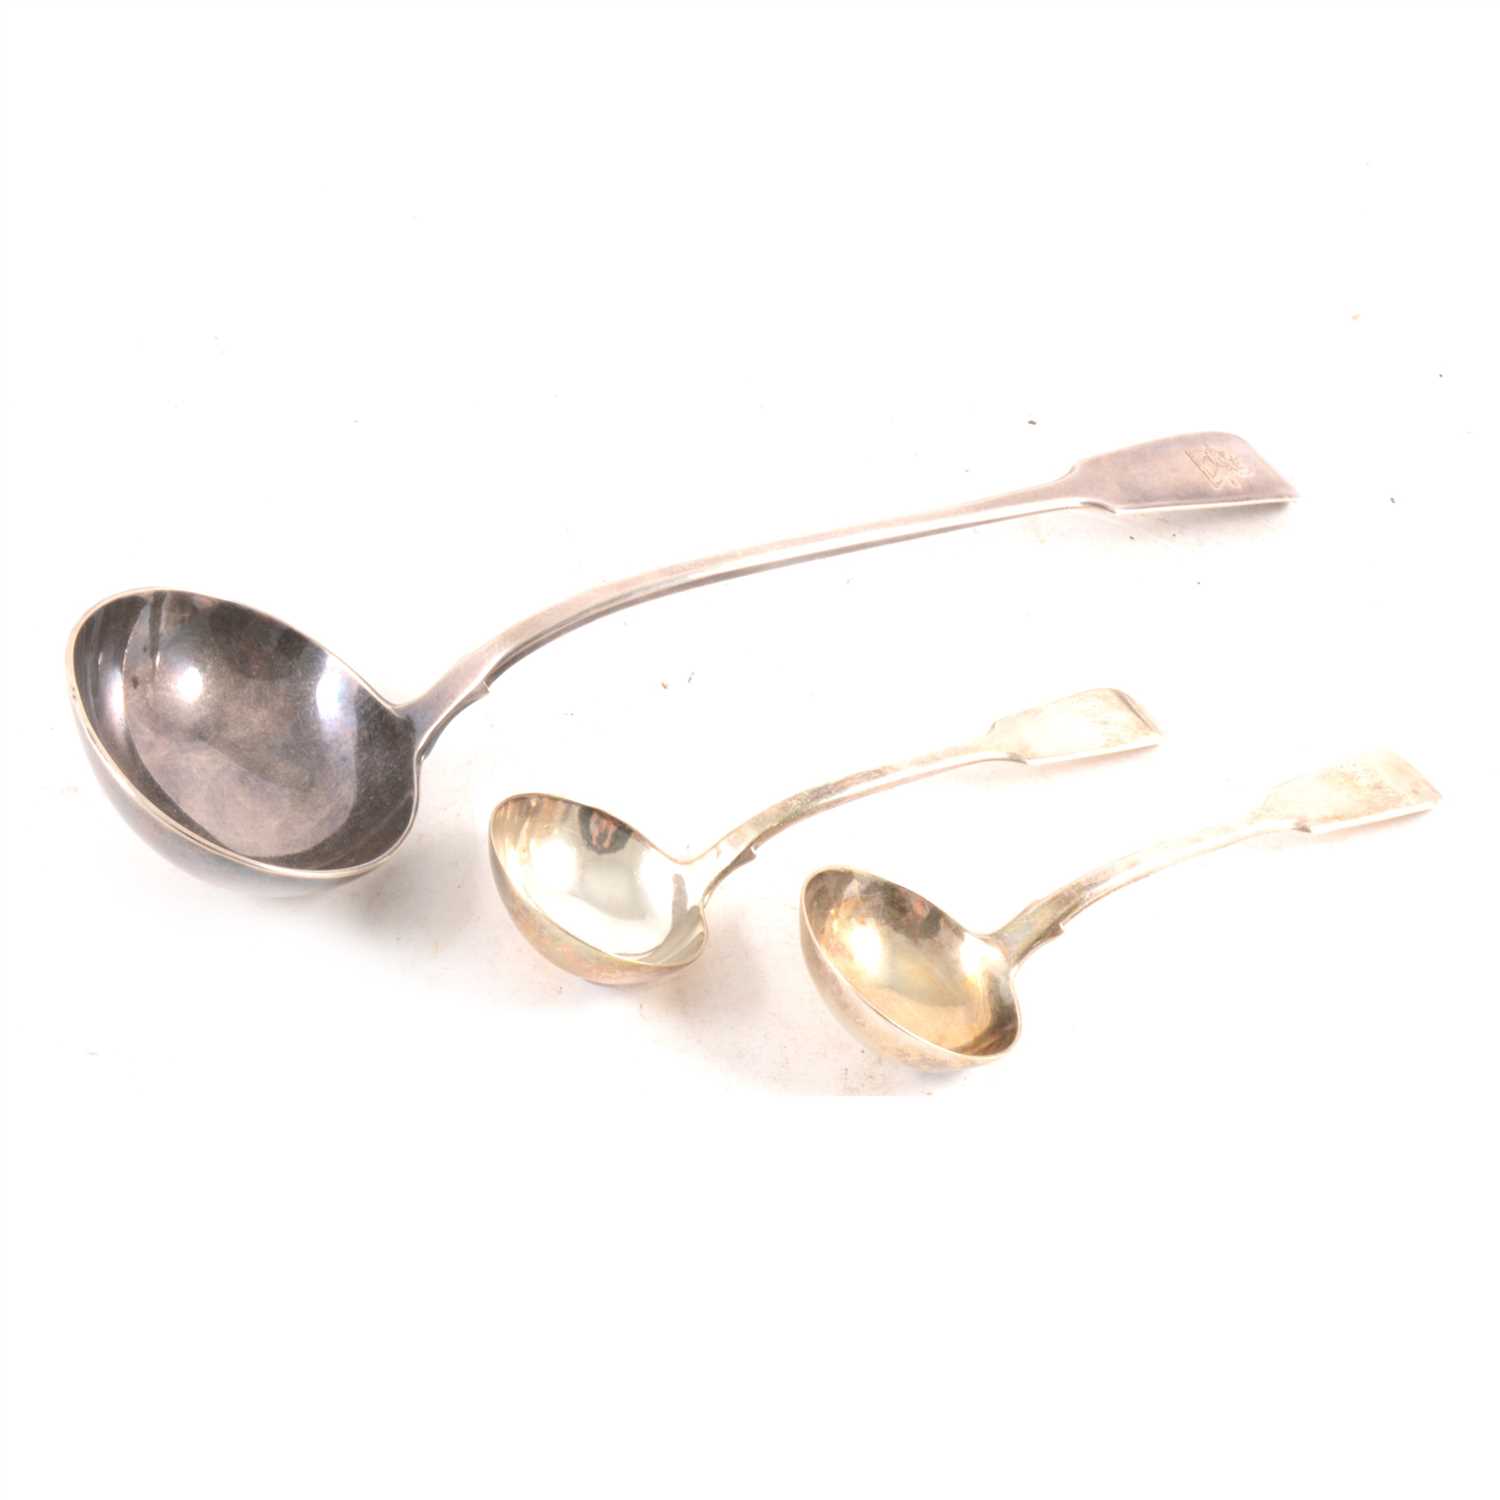 Lot 179 - Silver ladle and pair of sauce ladles